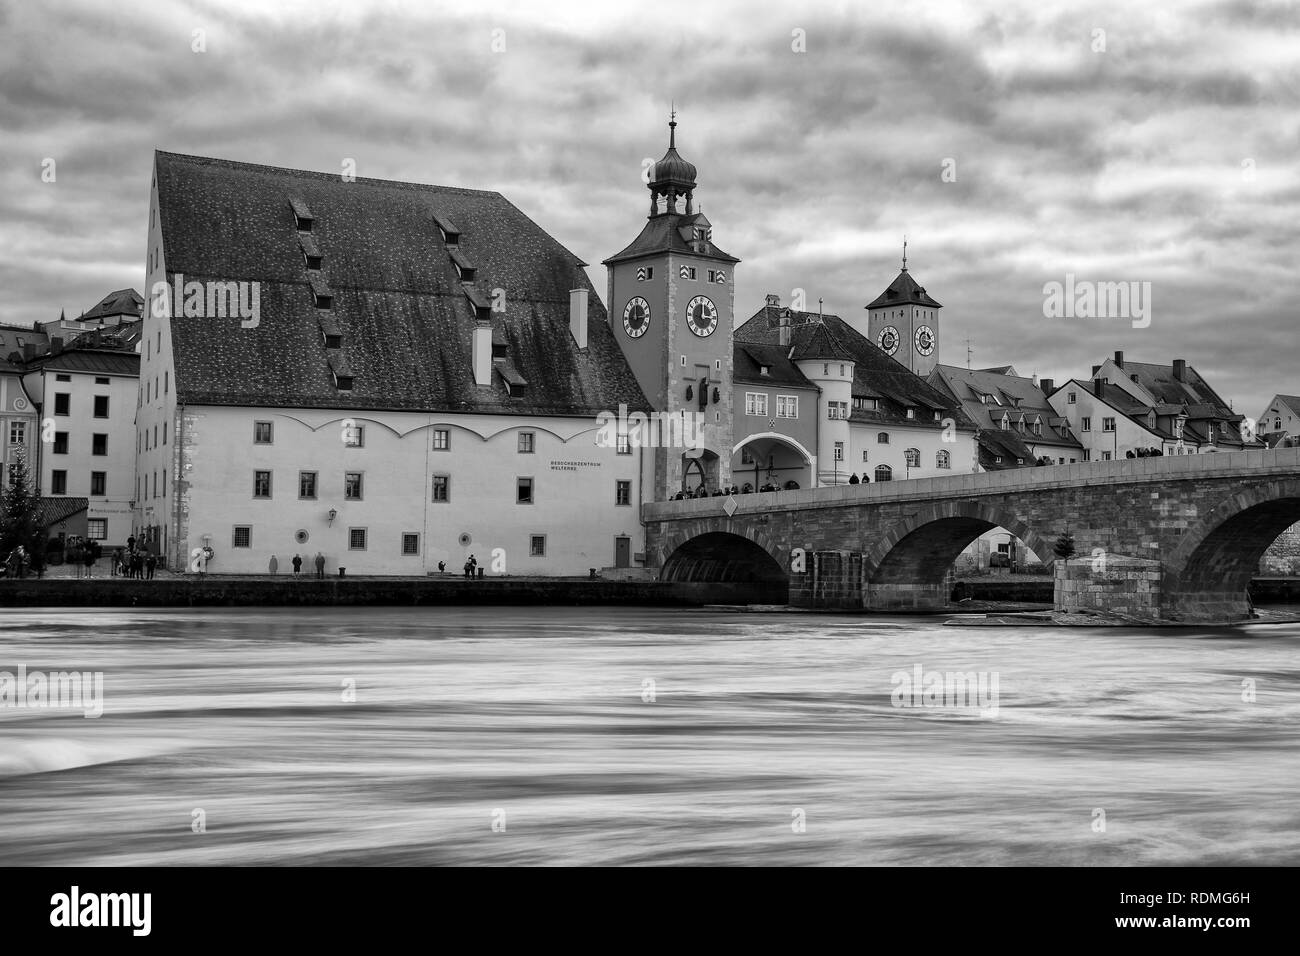 Medieval stone arch bridge over the Danube river with historic buildings and city gate, Regensburg, Germany. Stock Photo